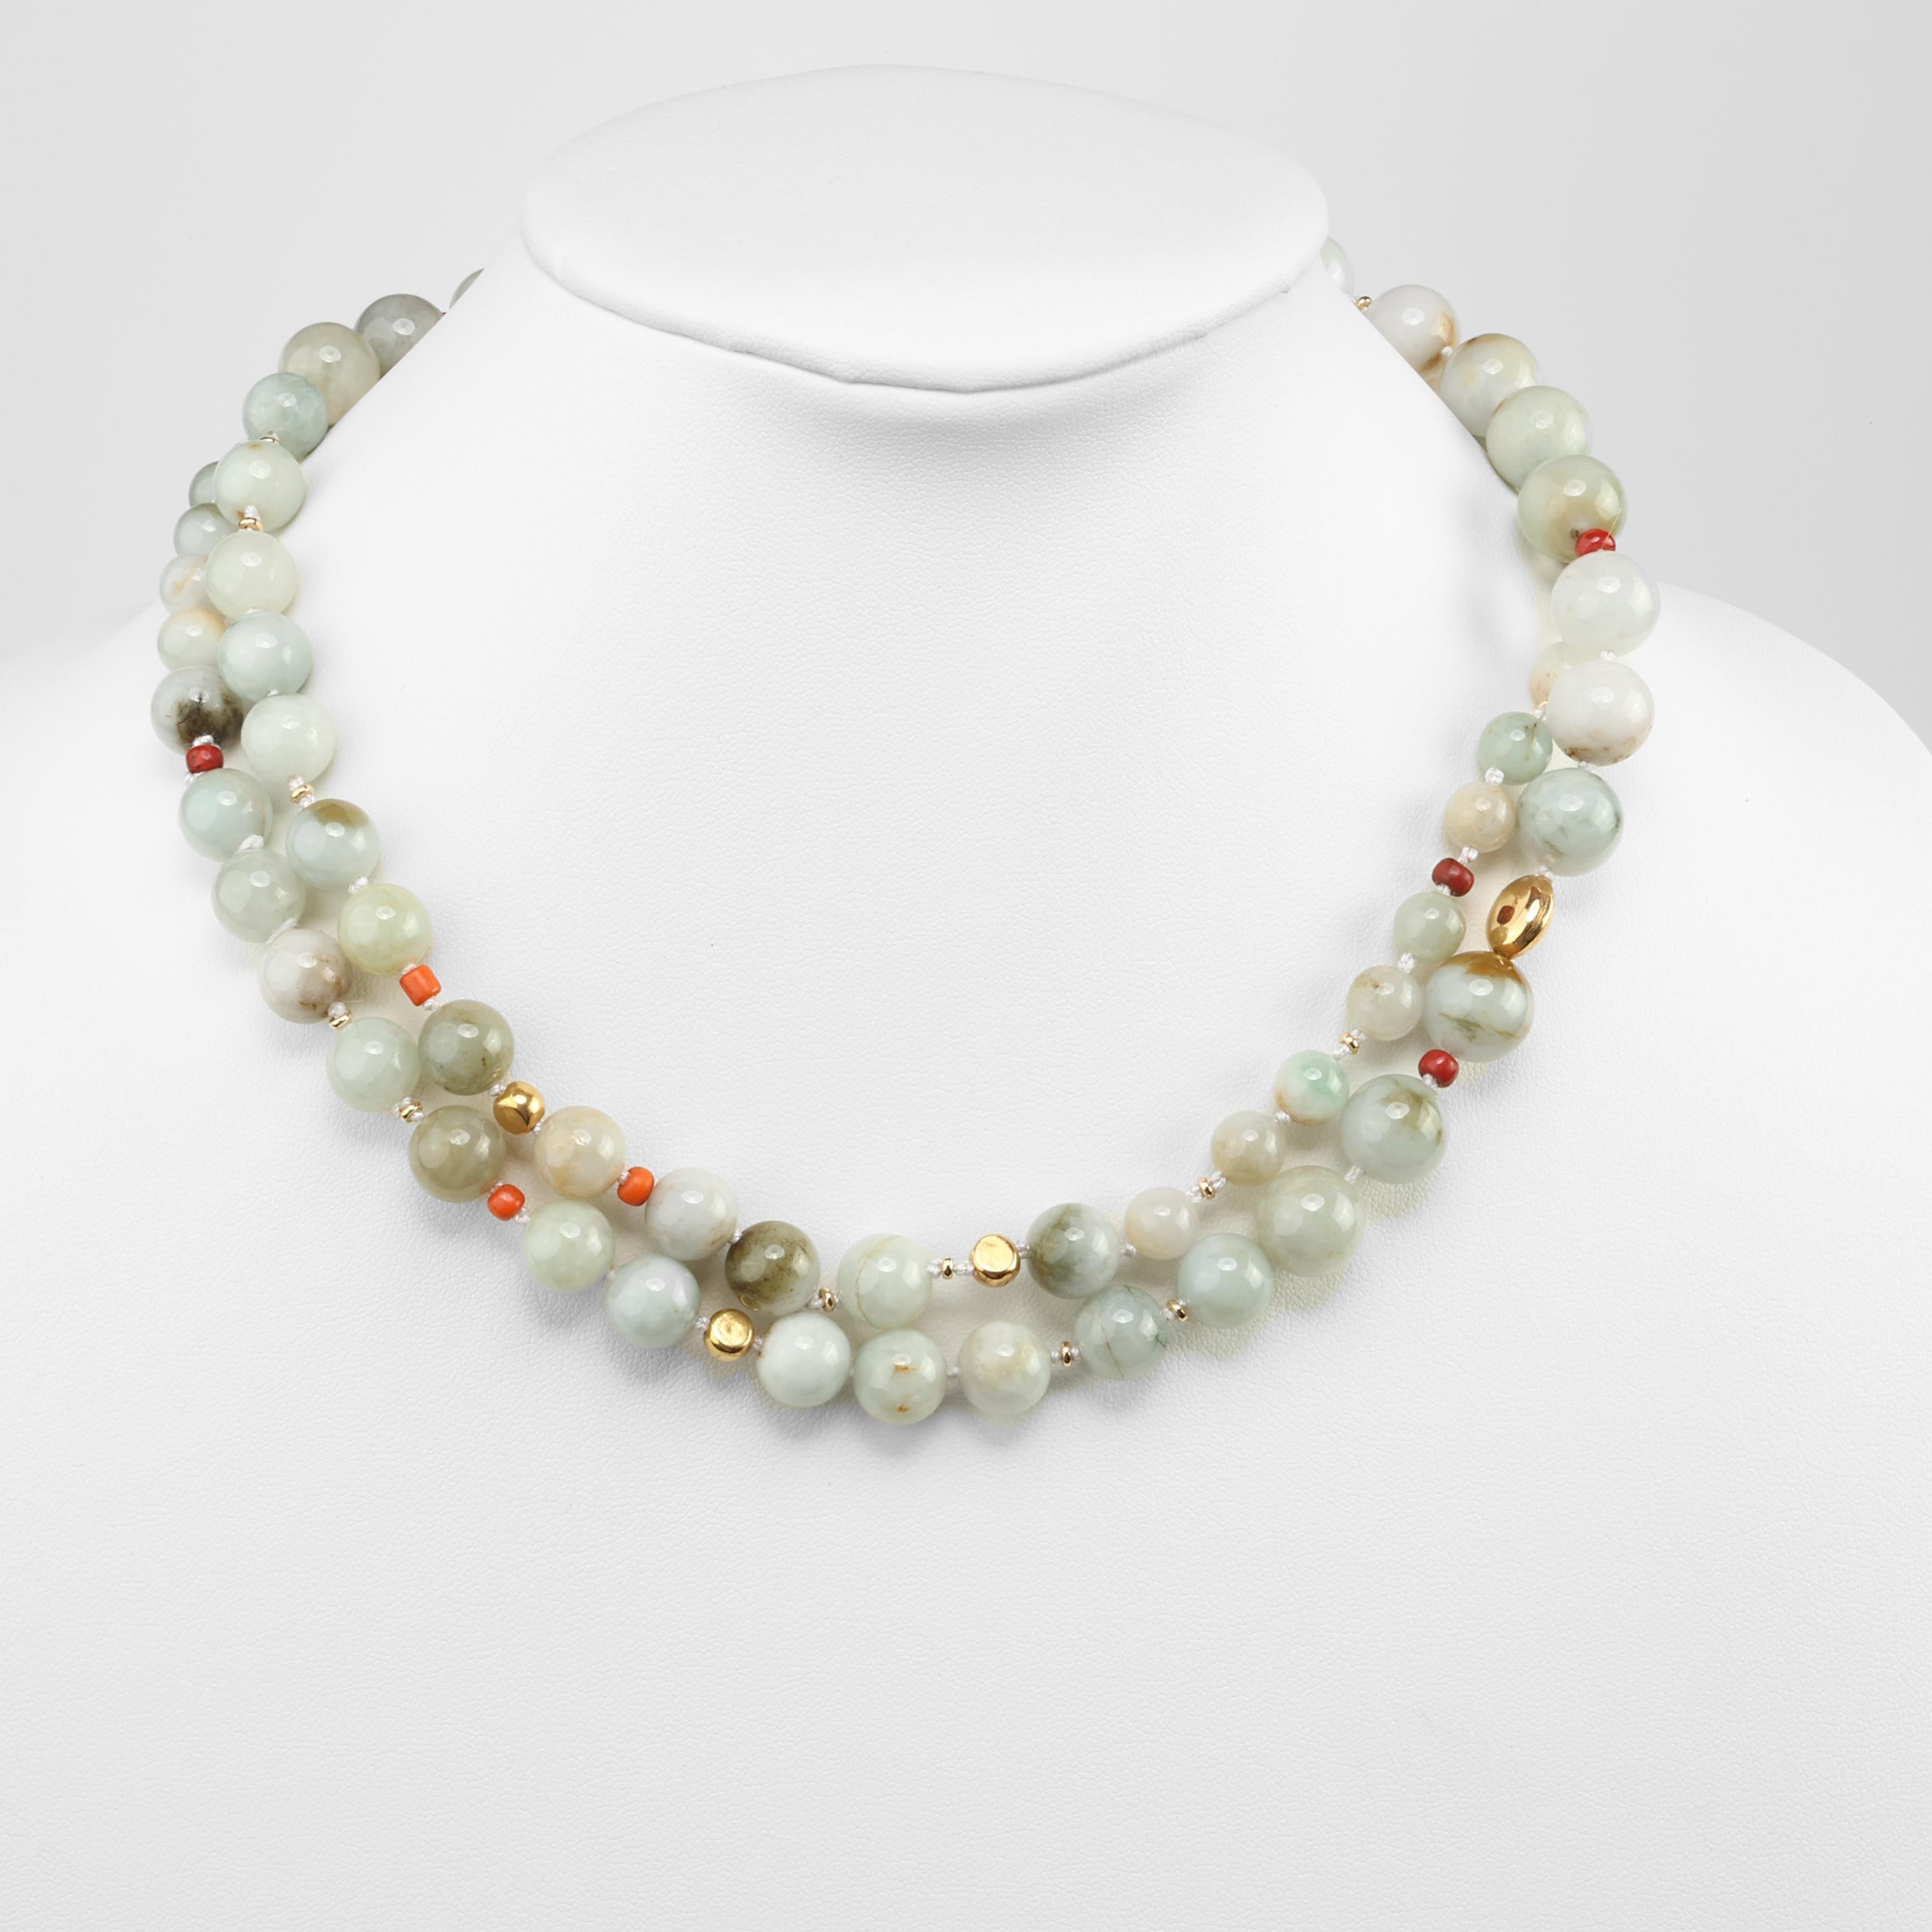 Artisan Jade Necklace with Gold and Glass Beads Certified Untreated